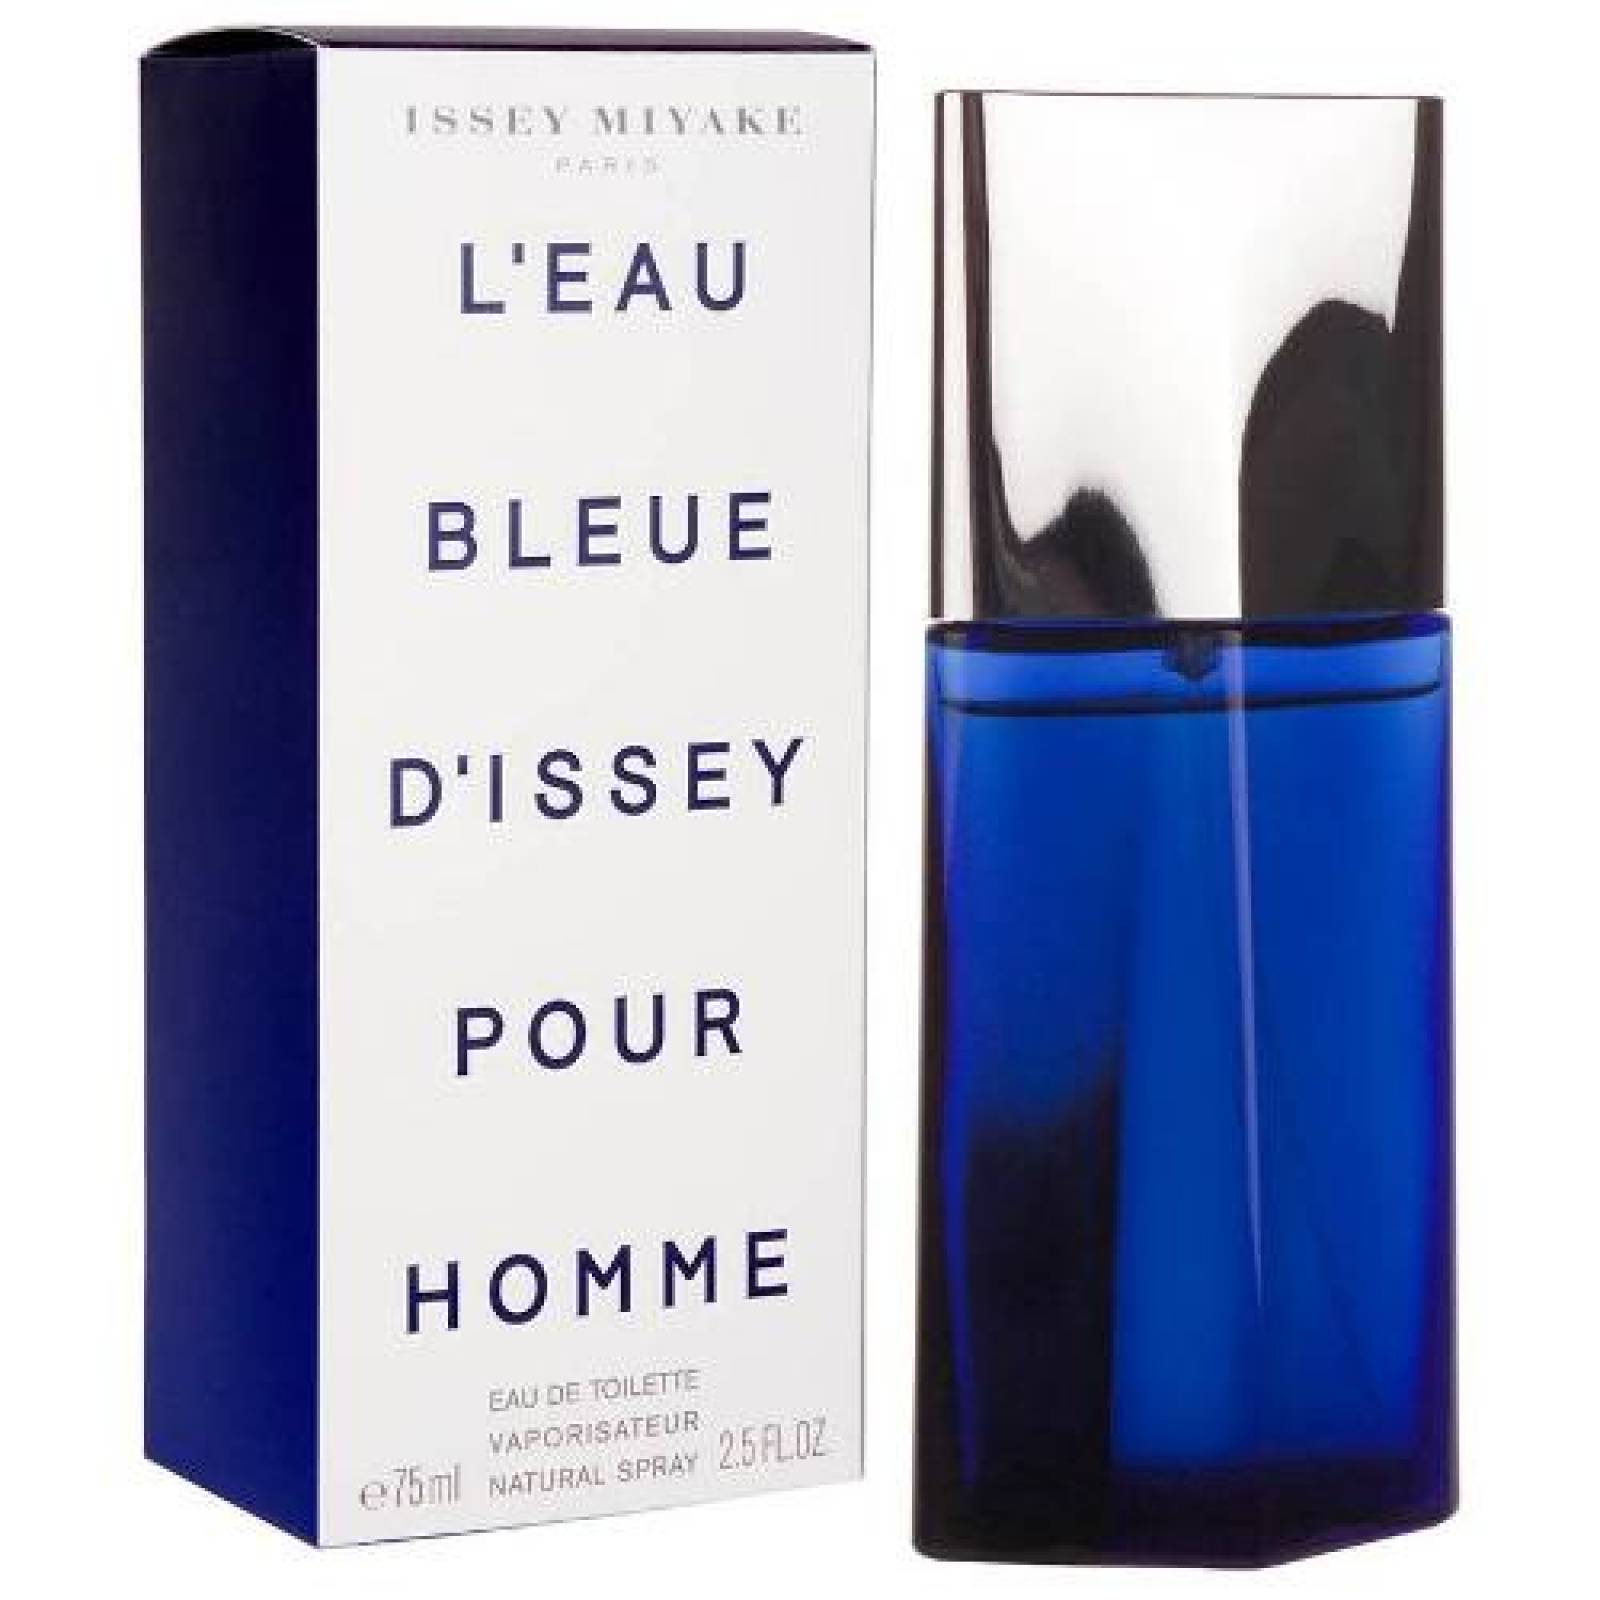 L Eau Bleue D Issey Pour Homme Caballero 75 Ml Issey Miyake